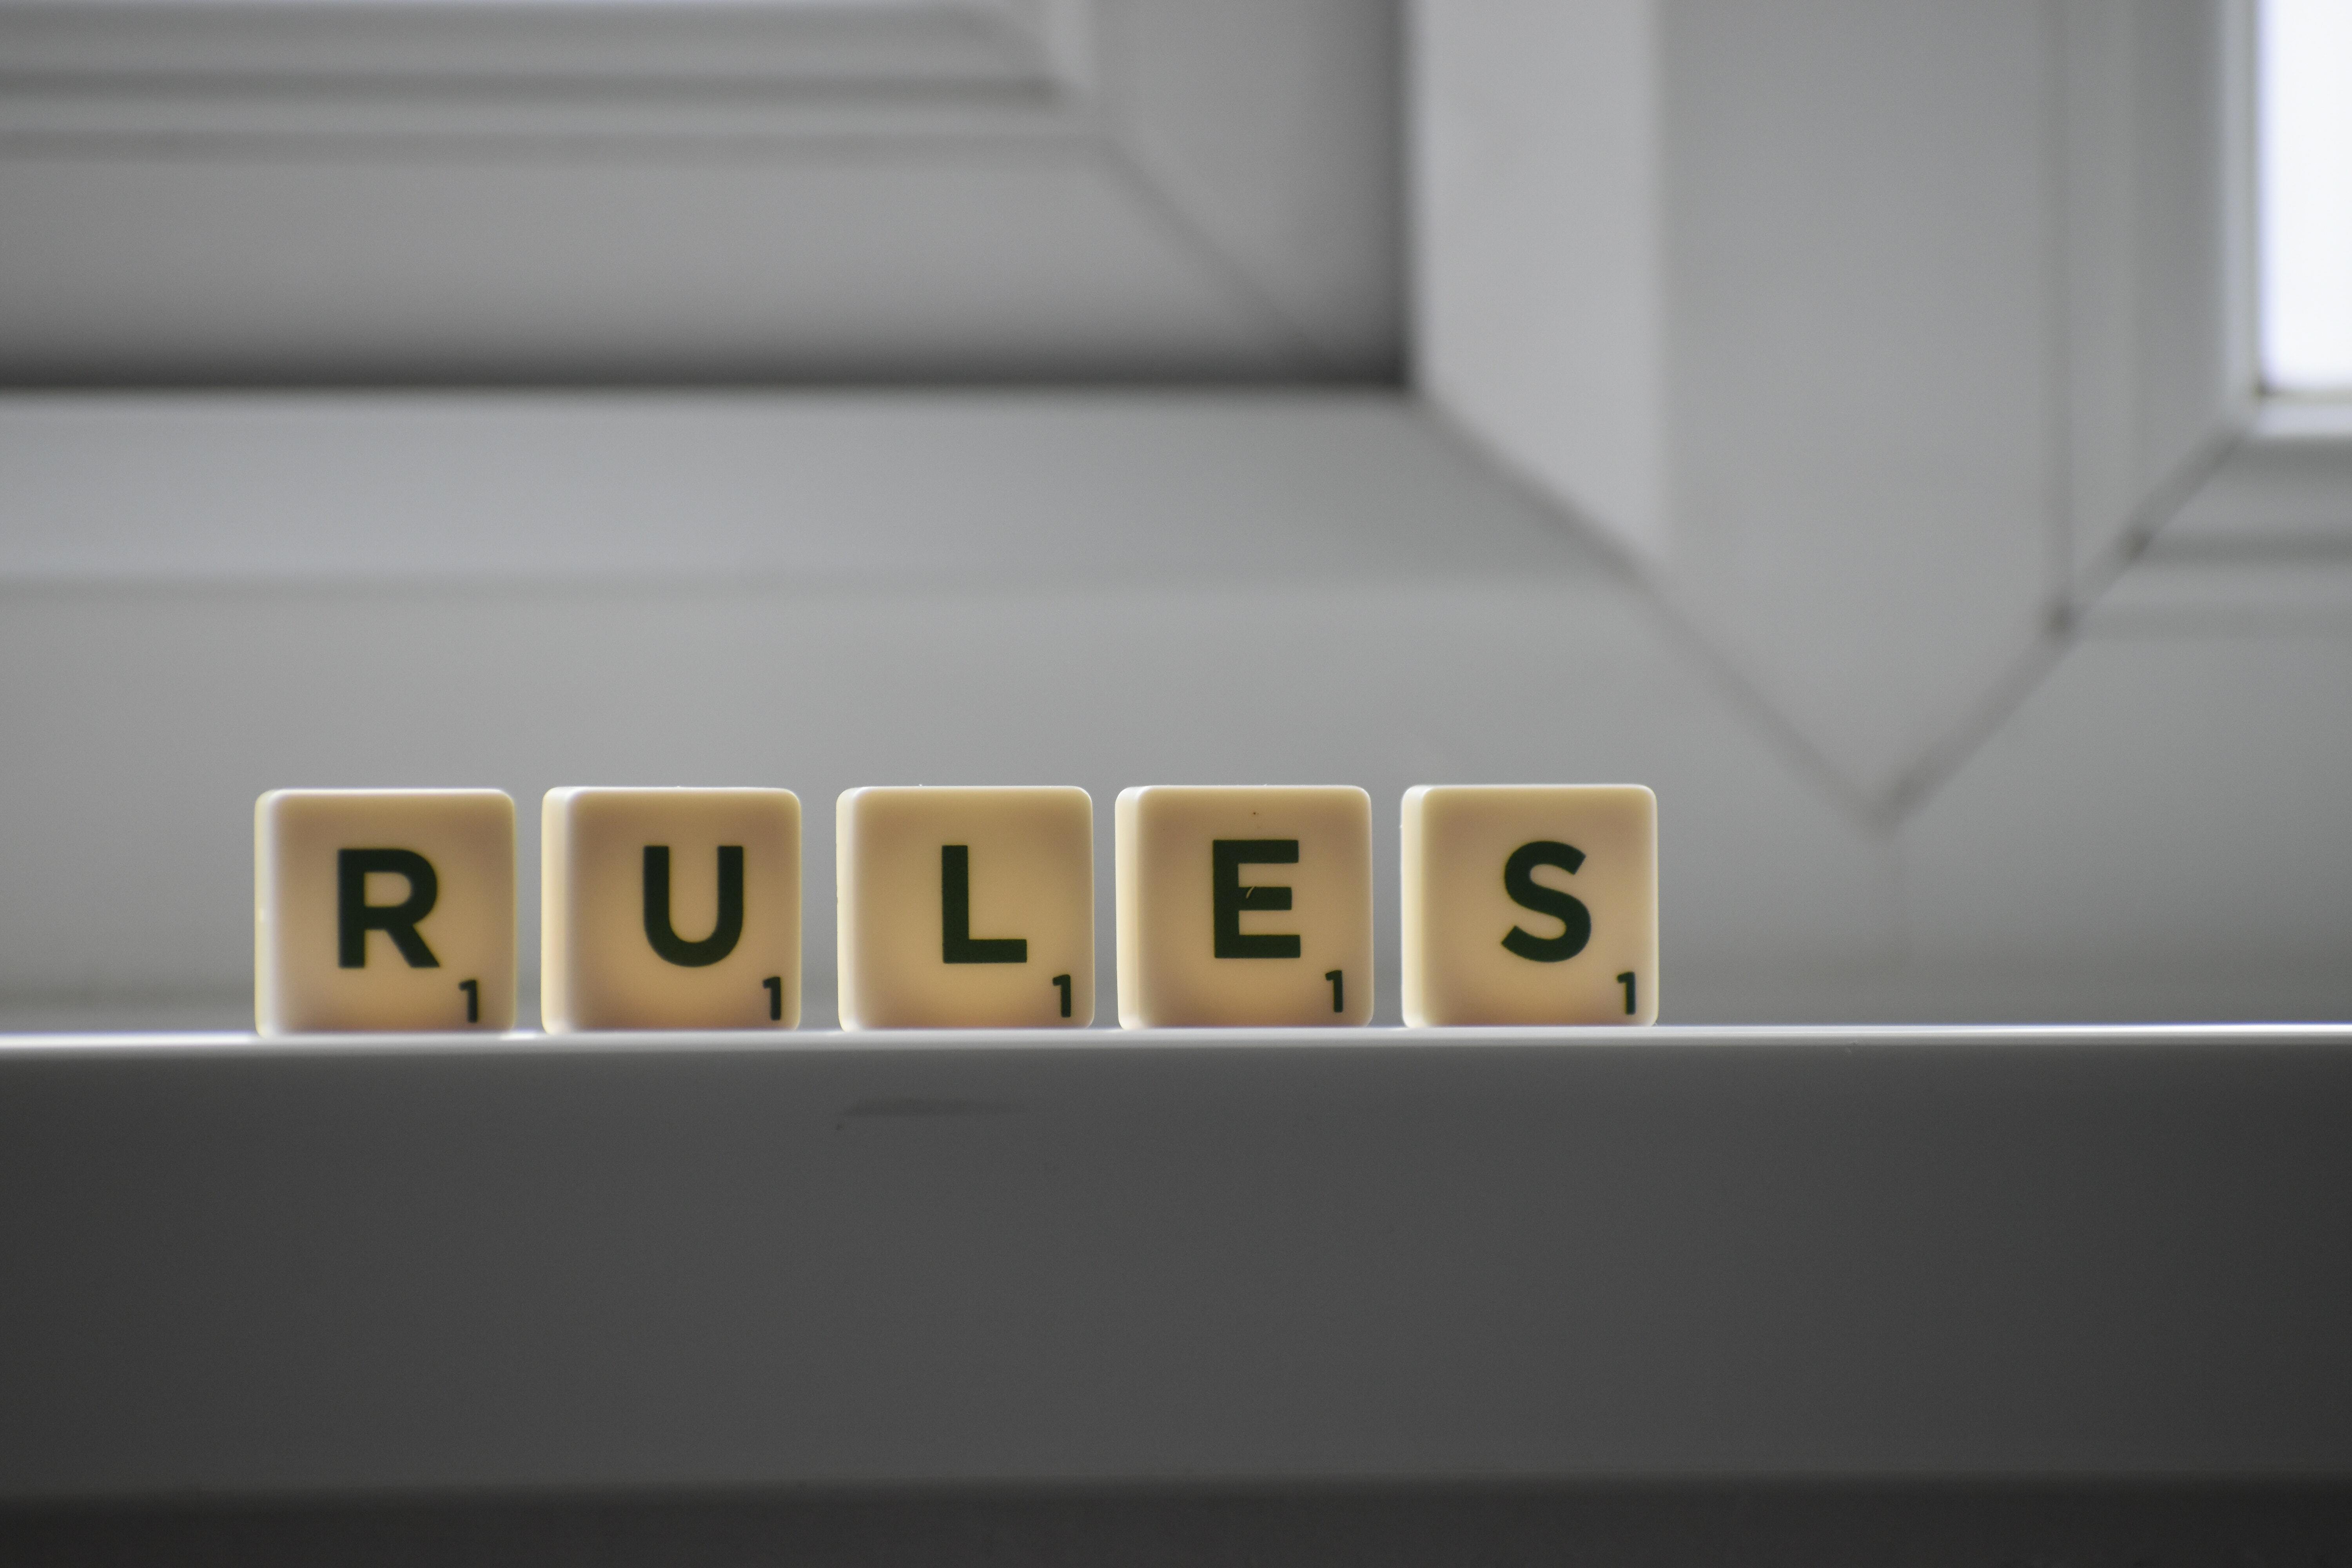 Rules lettering